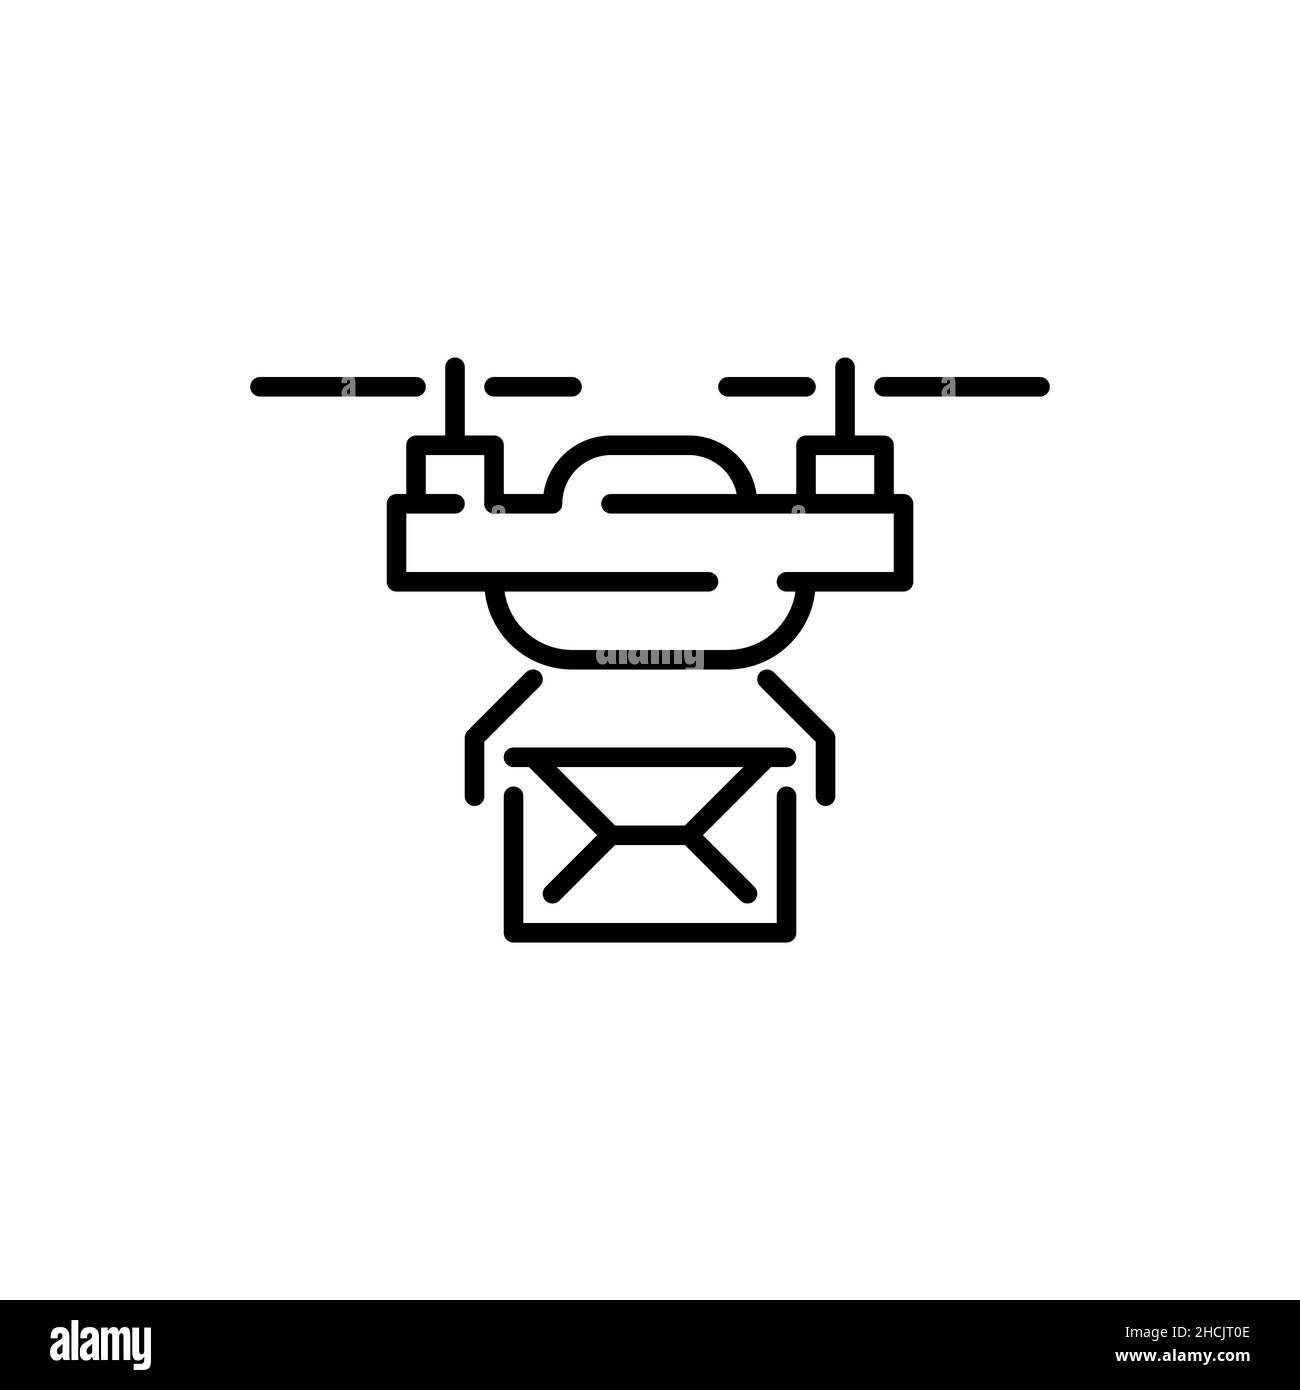 Drone delivering a letter. Unmanned automatic aircraft used for transporting goods. Pixel perfect, editable stroke icon Stock Vector